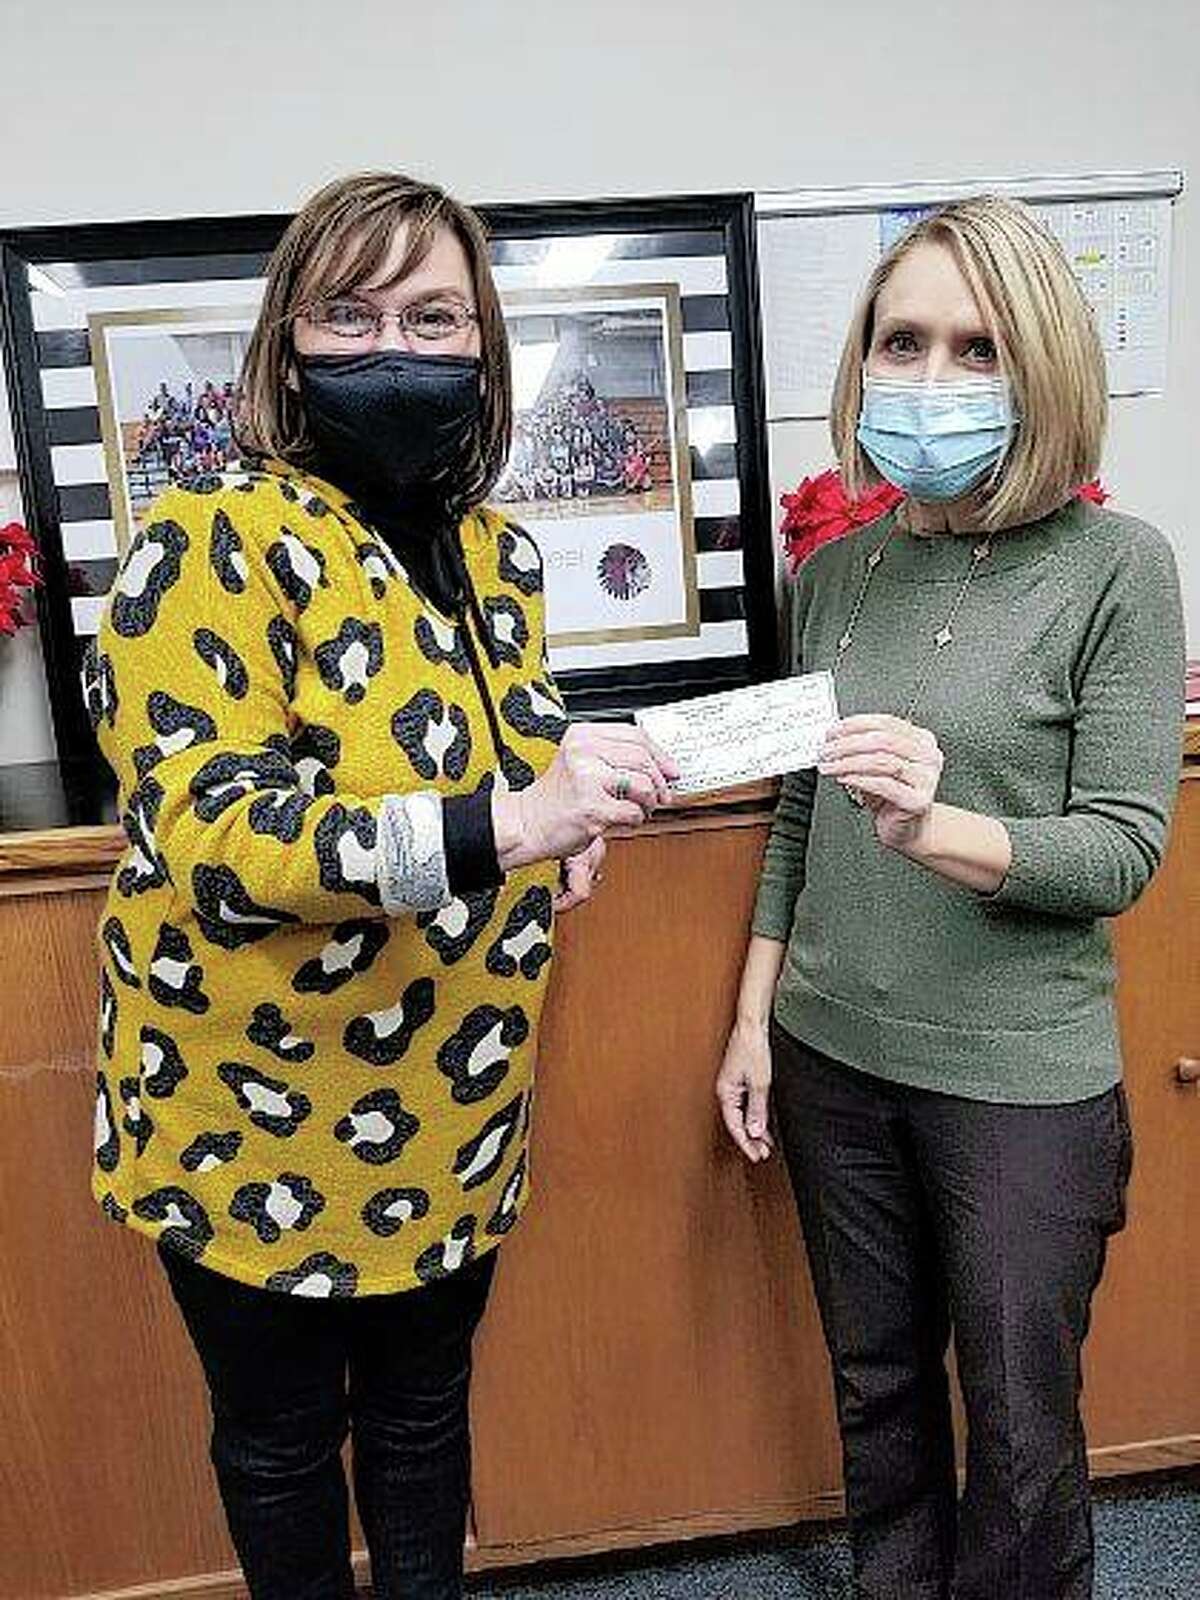 Rotary Club of Pike County President Sheila Davidsmeyer (right) presents a check to Pikeland schools Superintendent Carol Kilver. The money helped fund the district’s personal protective equipment purchases amid the COVID-19 pandemic.